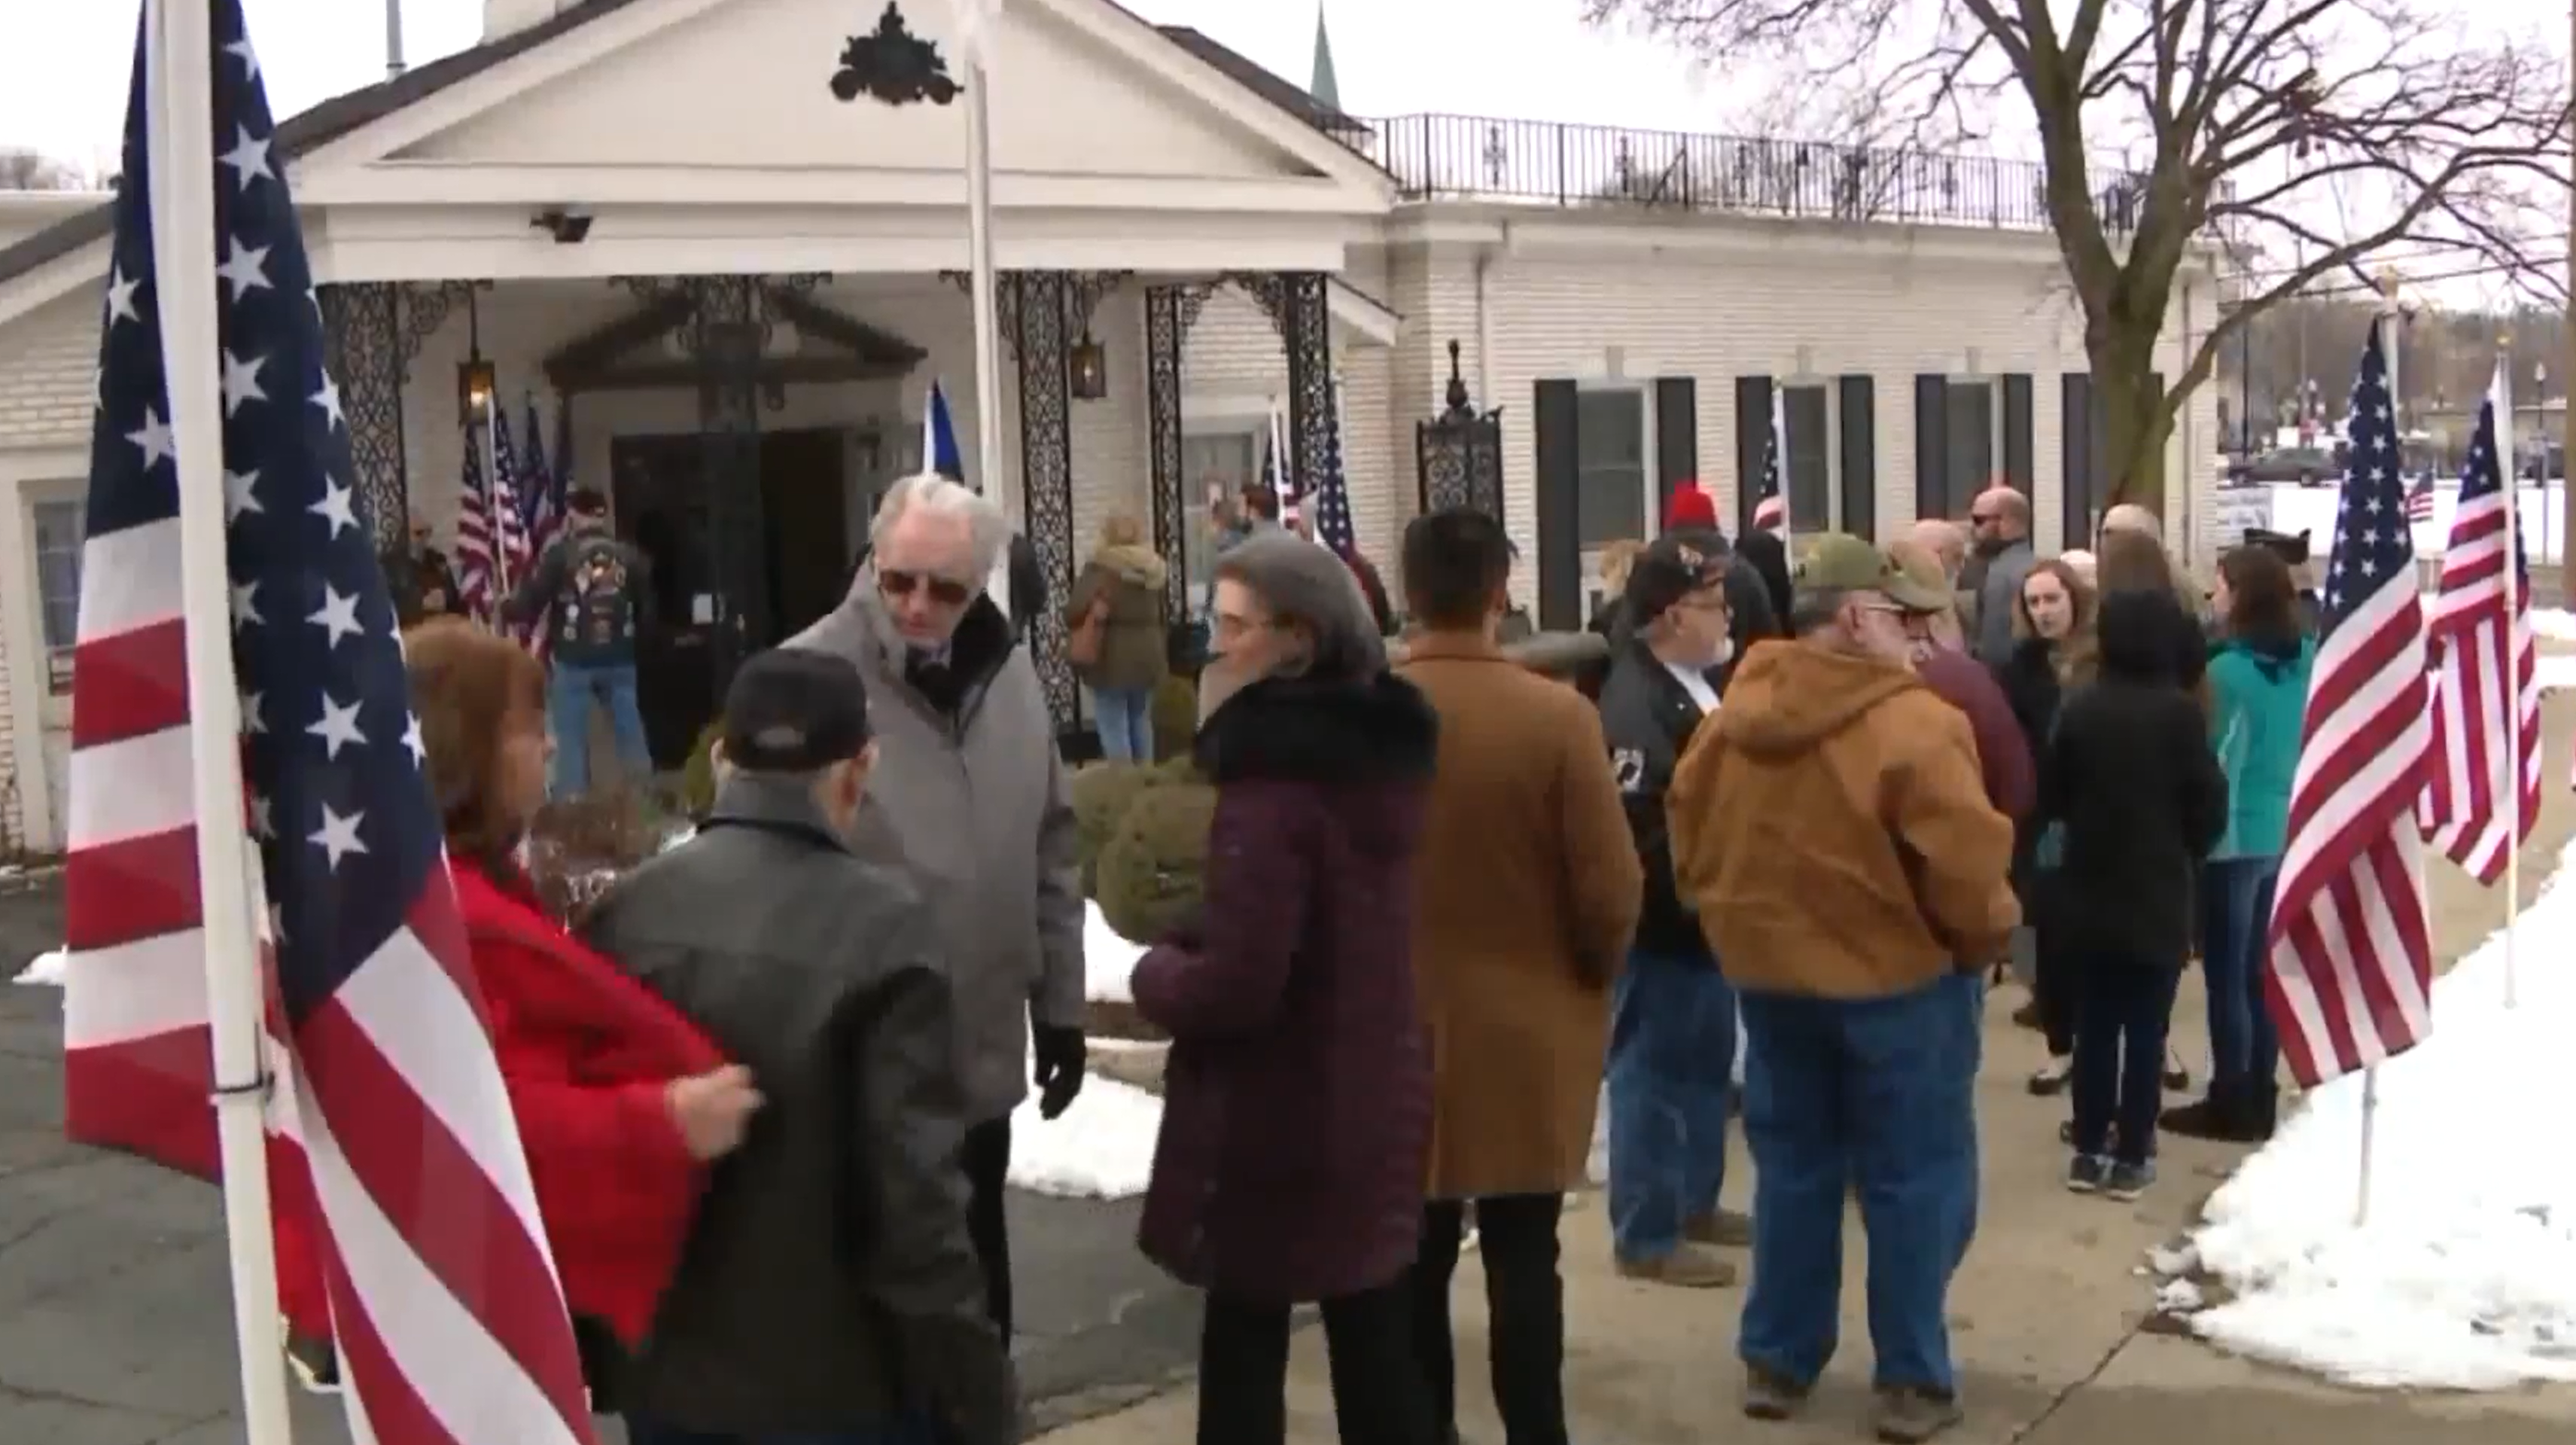 Supporters from all over pour into Illinois to honor ‘unclaimed veteran’ at memorial service